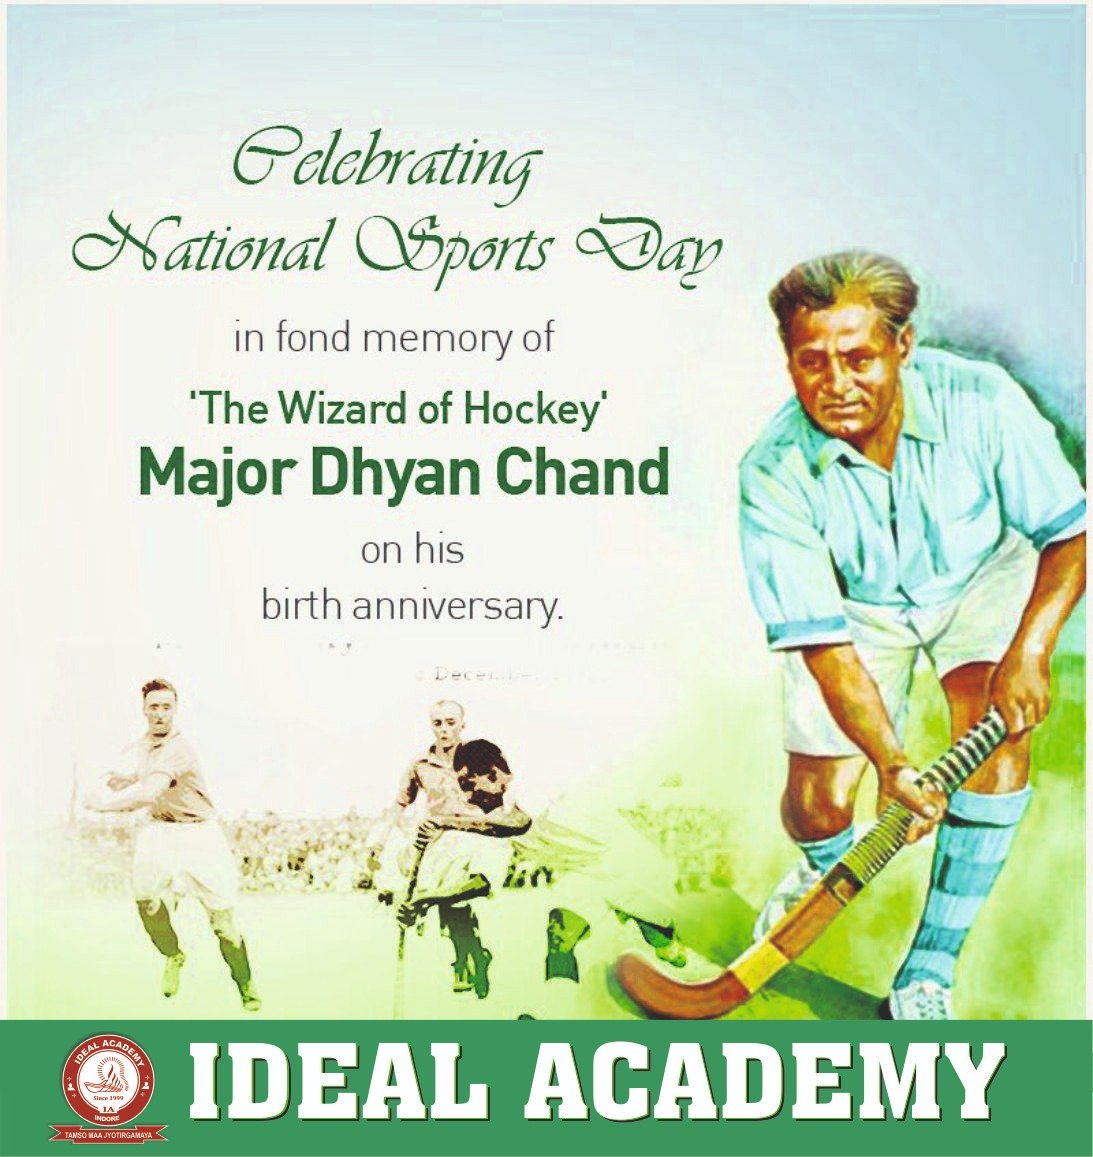 National Sports Day - Ideal Academy